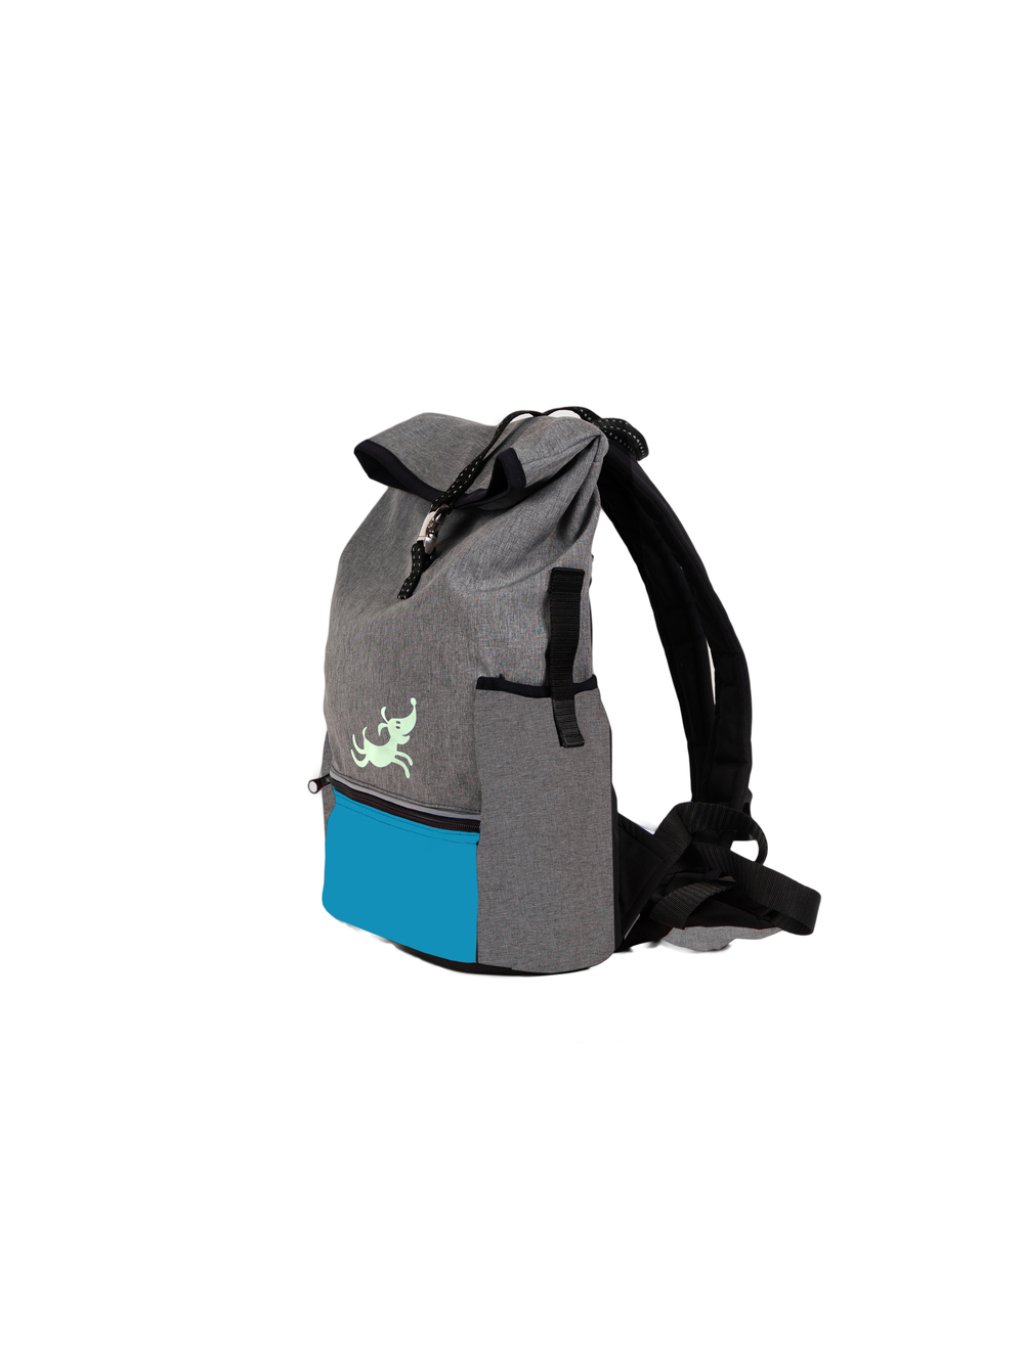 Training backpack with reflex. with top zipper closure - SALE